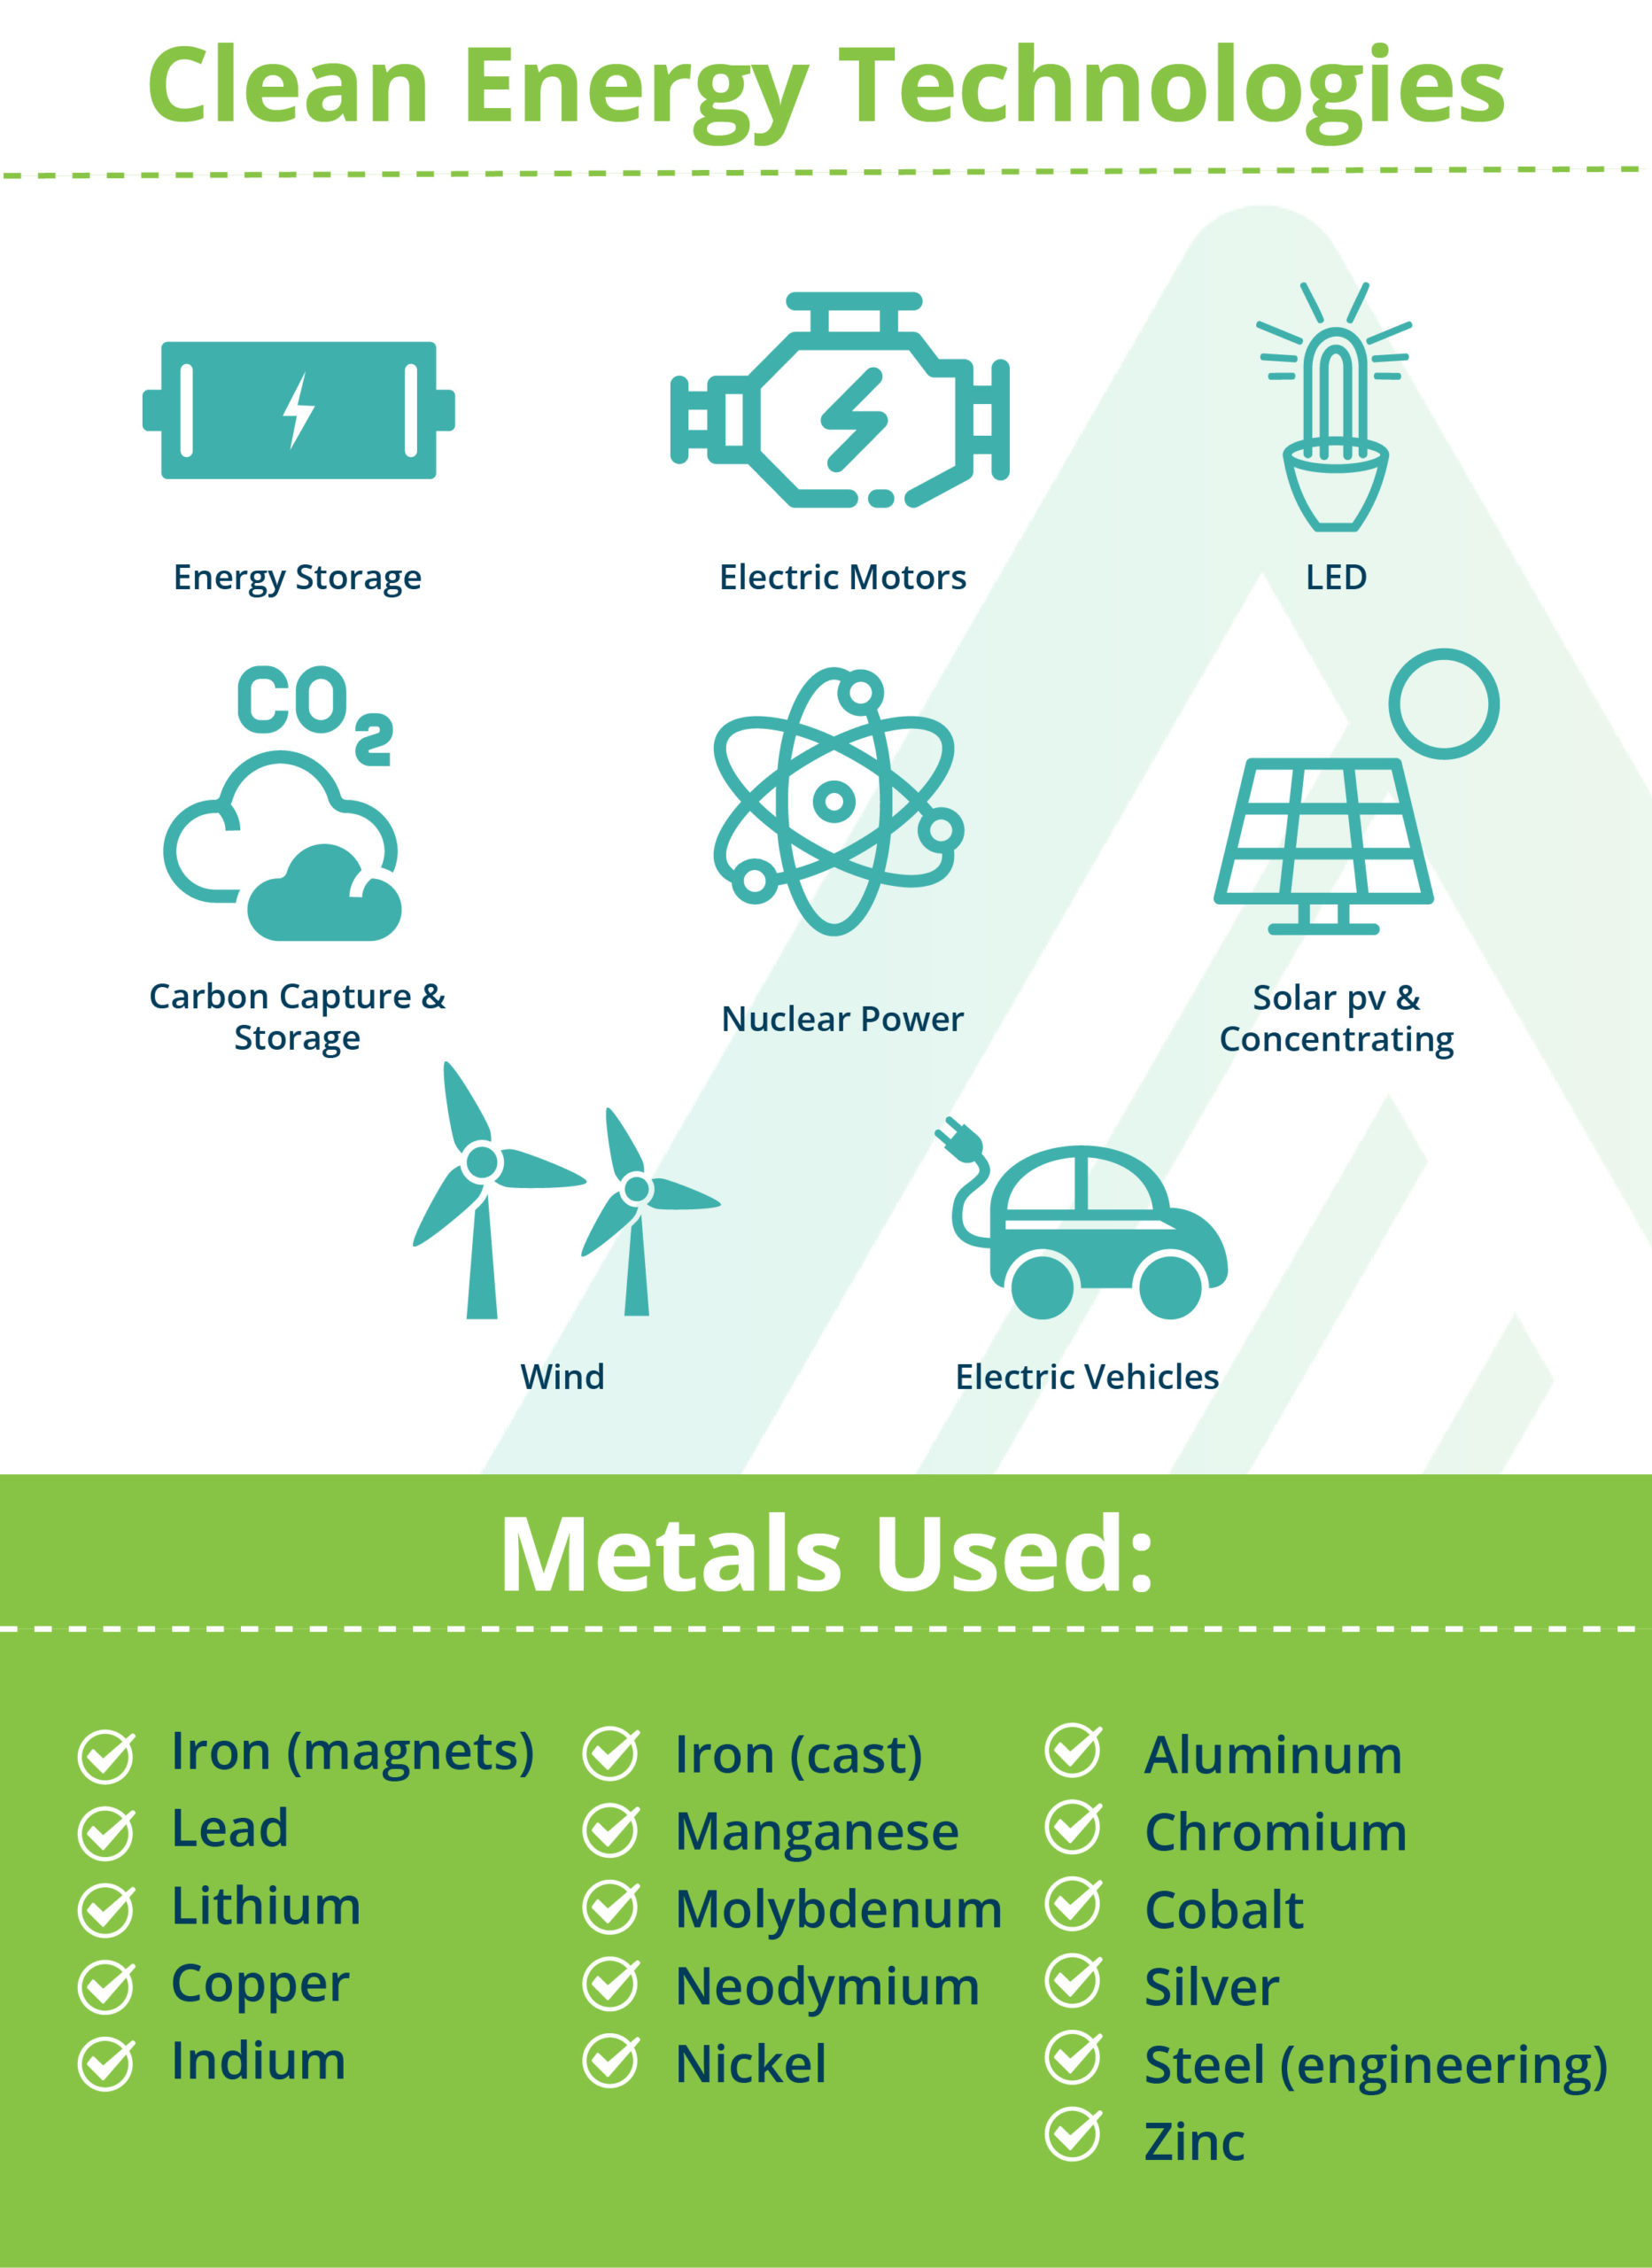 Clean energy technologies and metals used